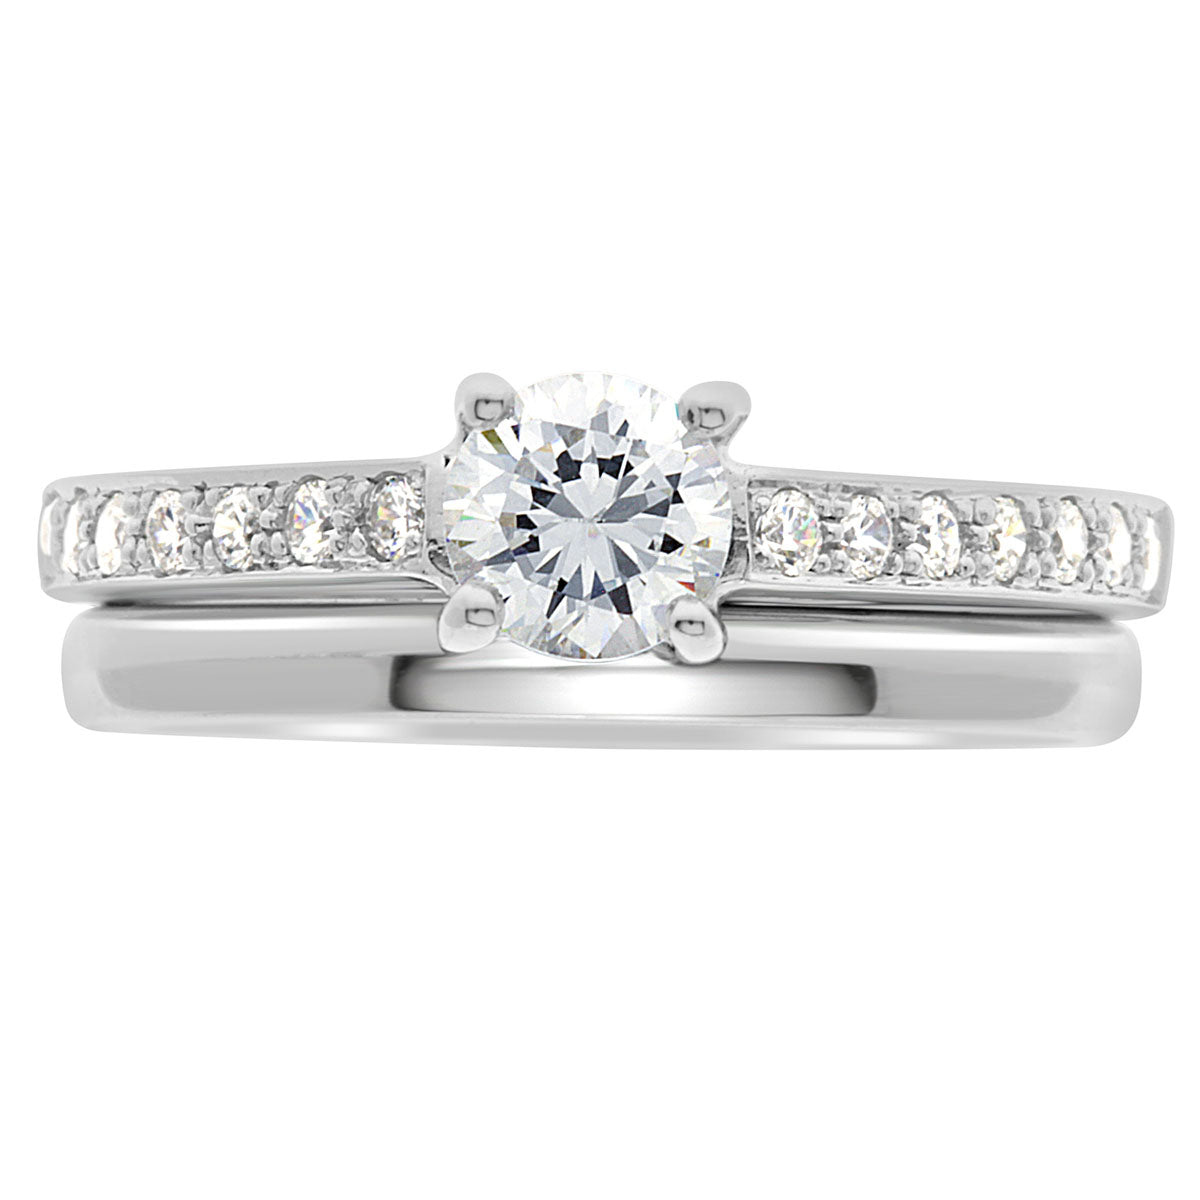 Pavé Diamond Ring manufactured in white gold with a plain wedding ring